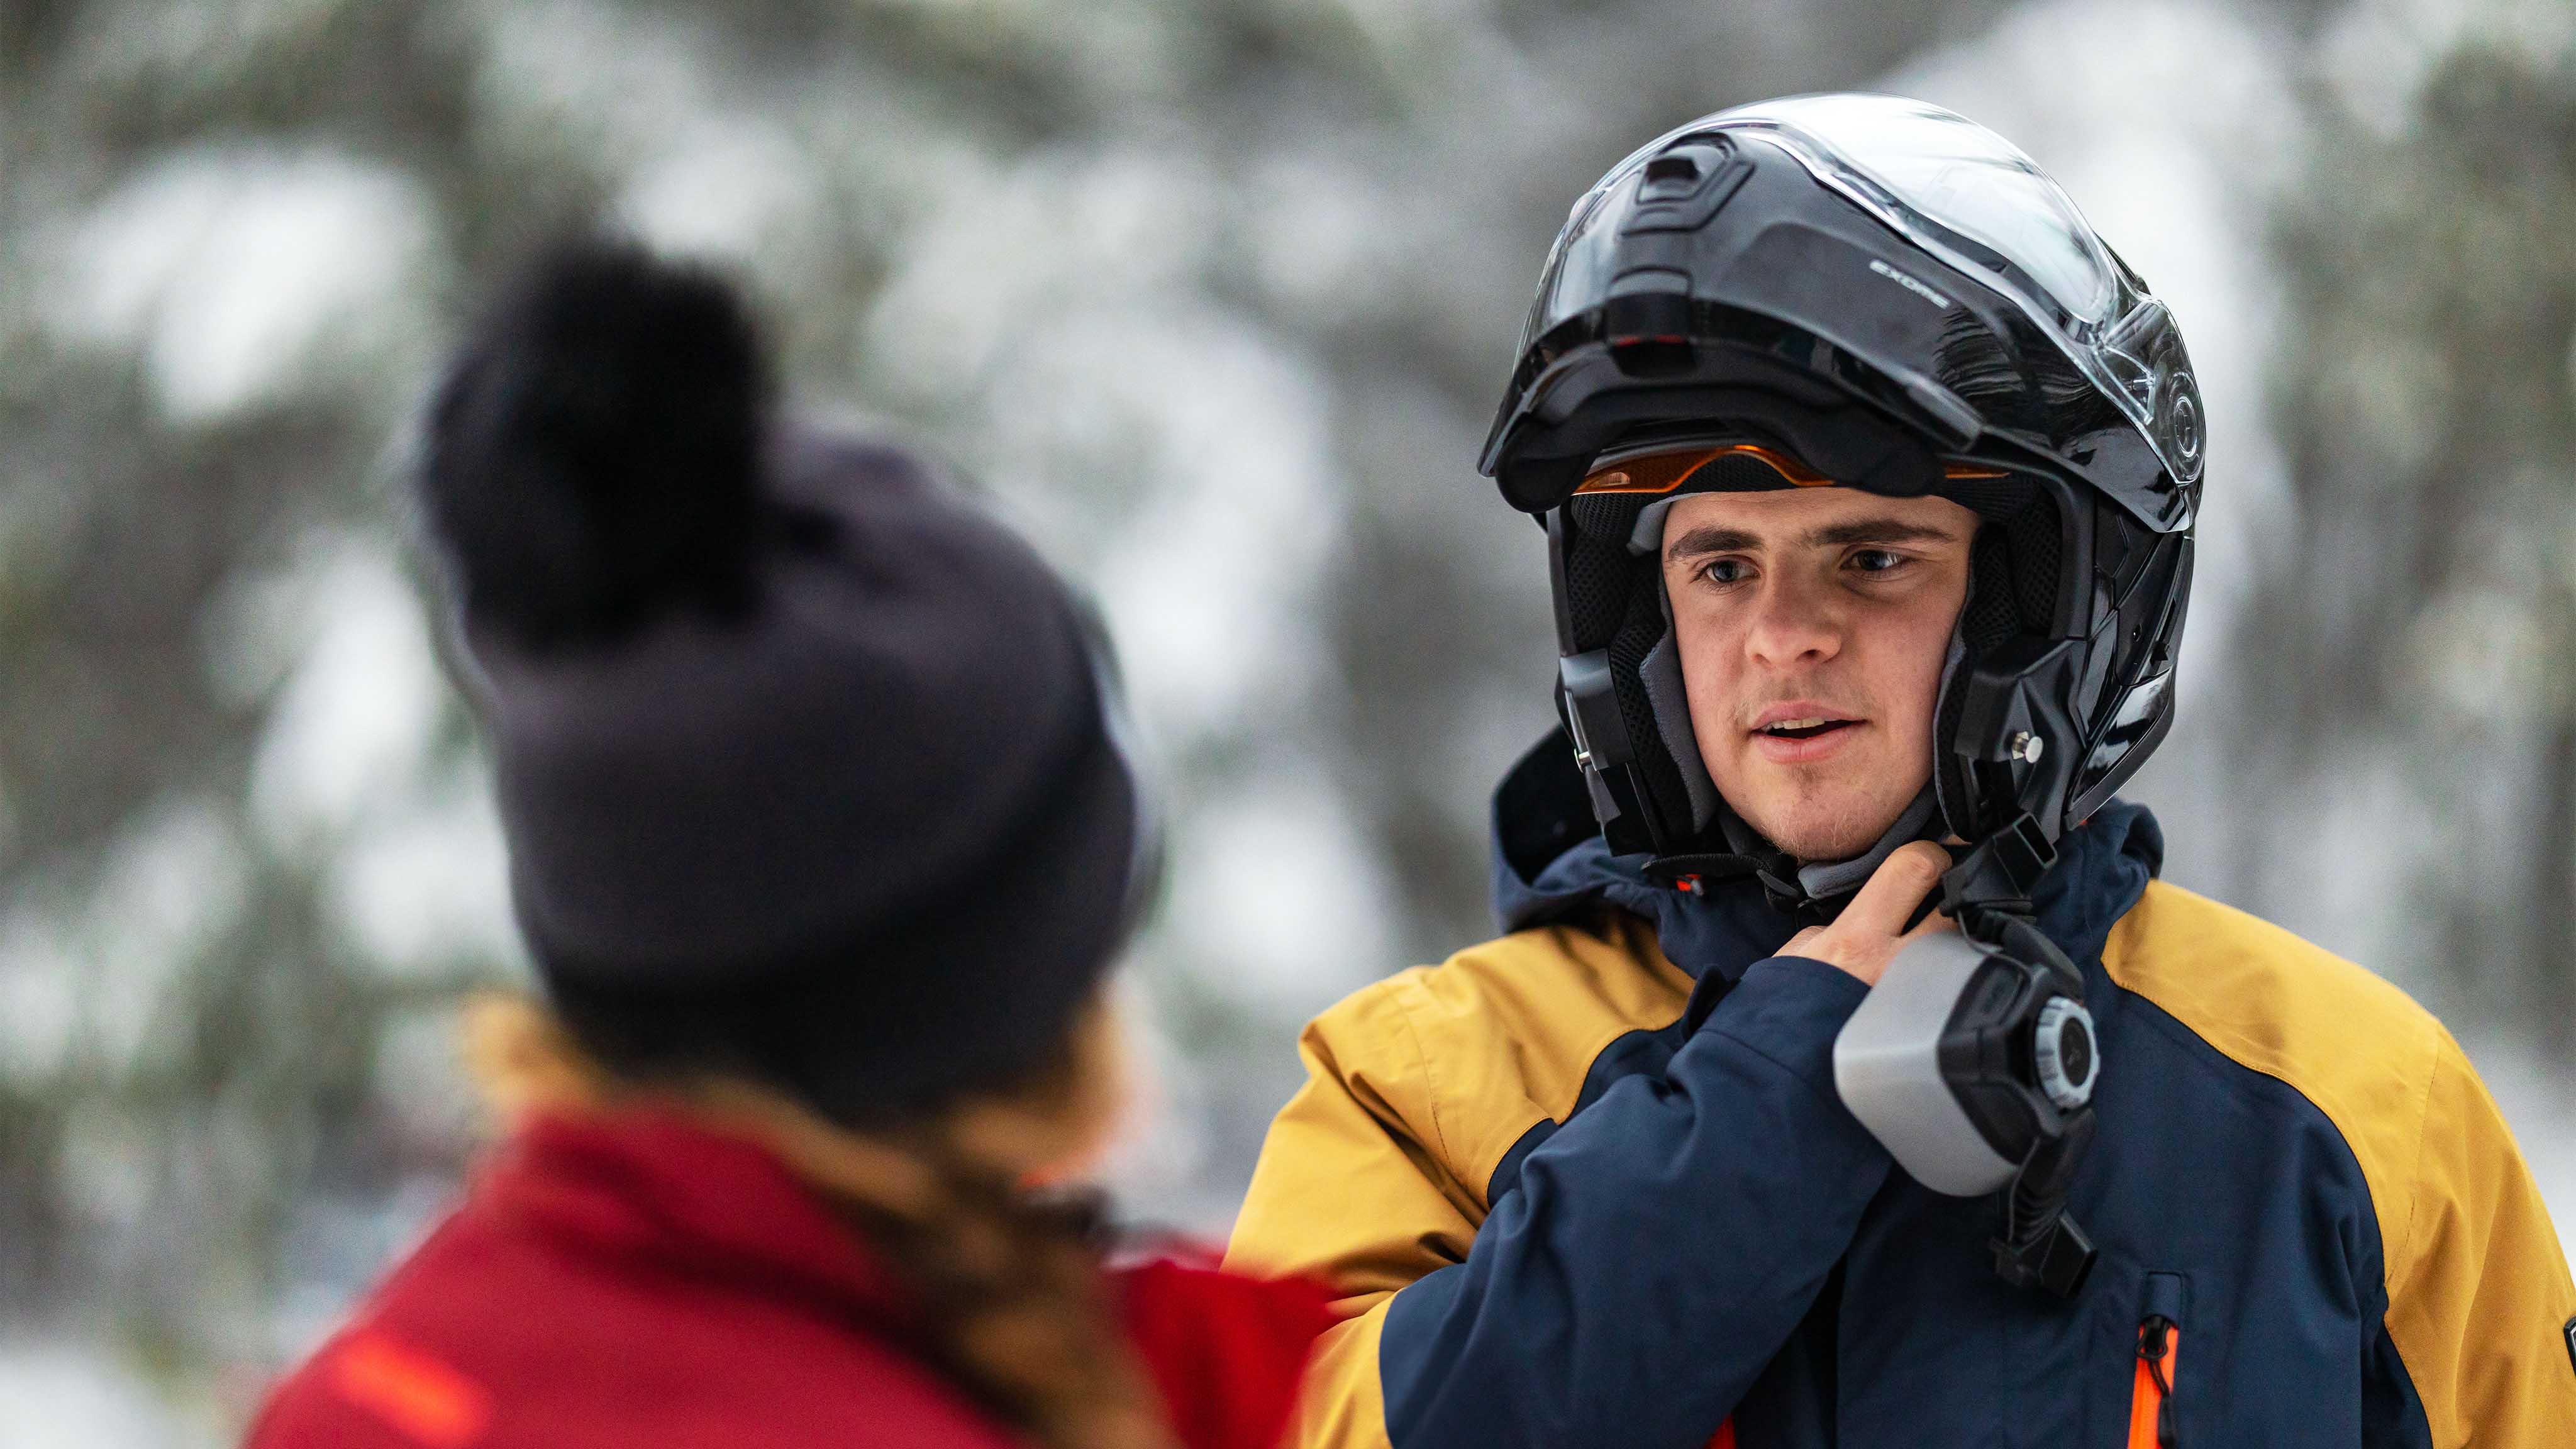 Rider removing his Exome helmet, keeping warm with Can-Am Expedition heated outerwear